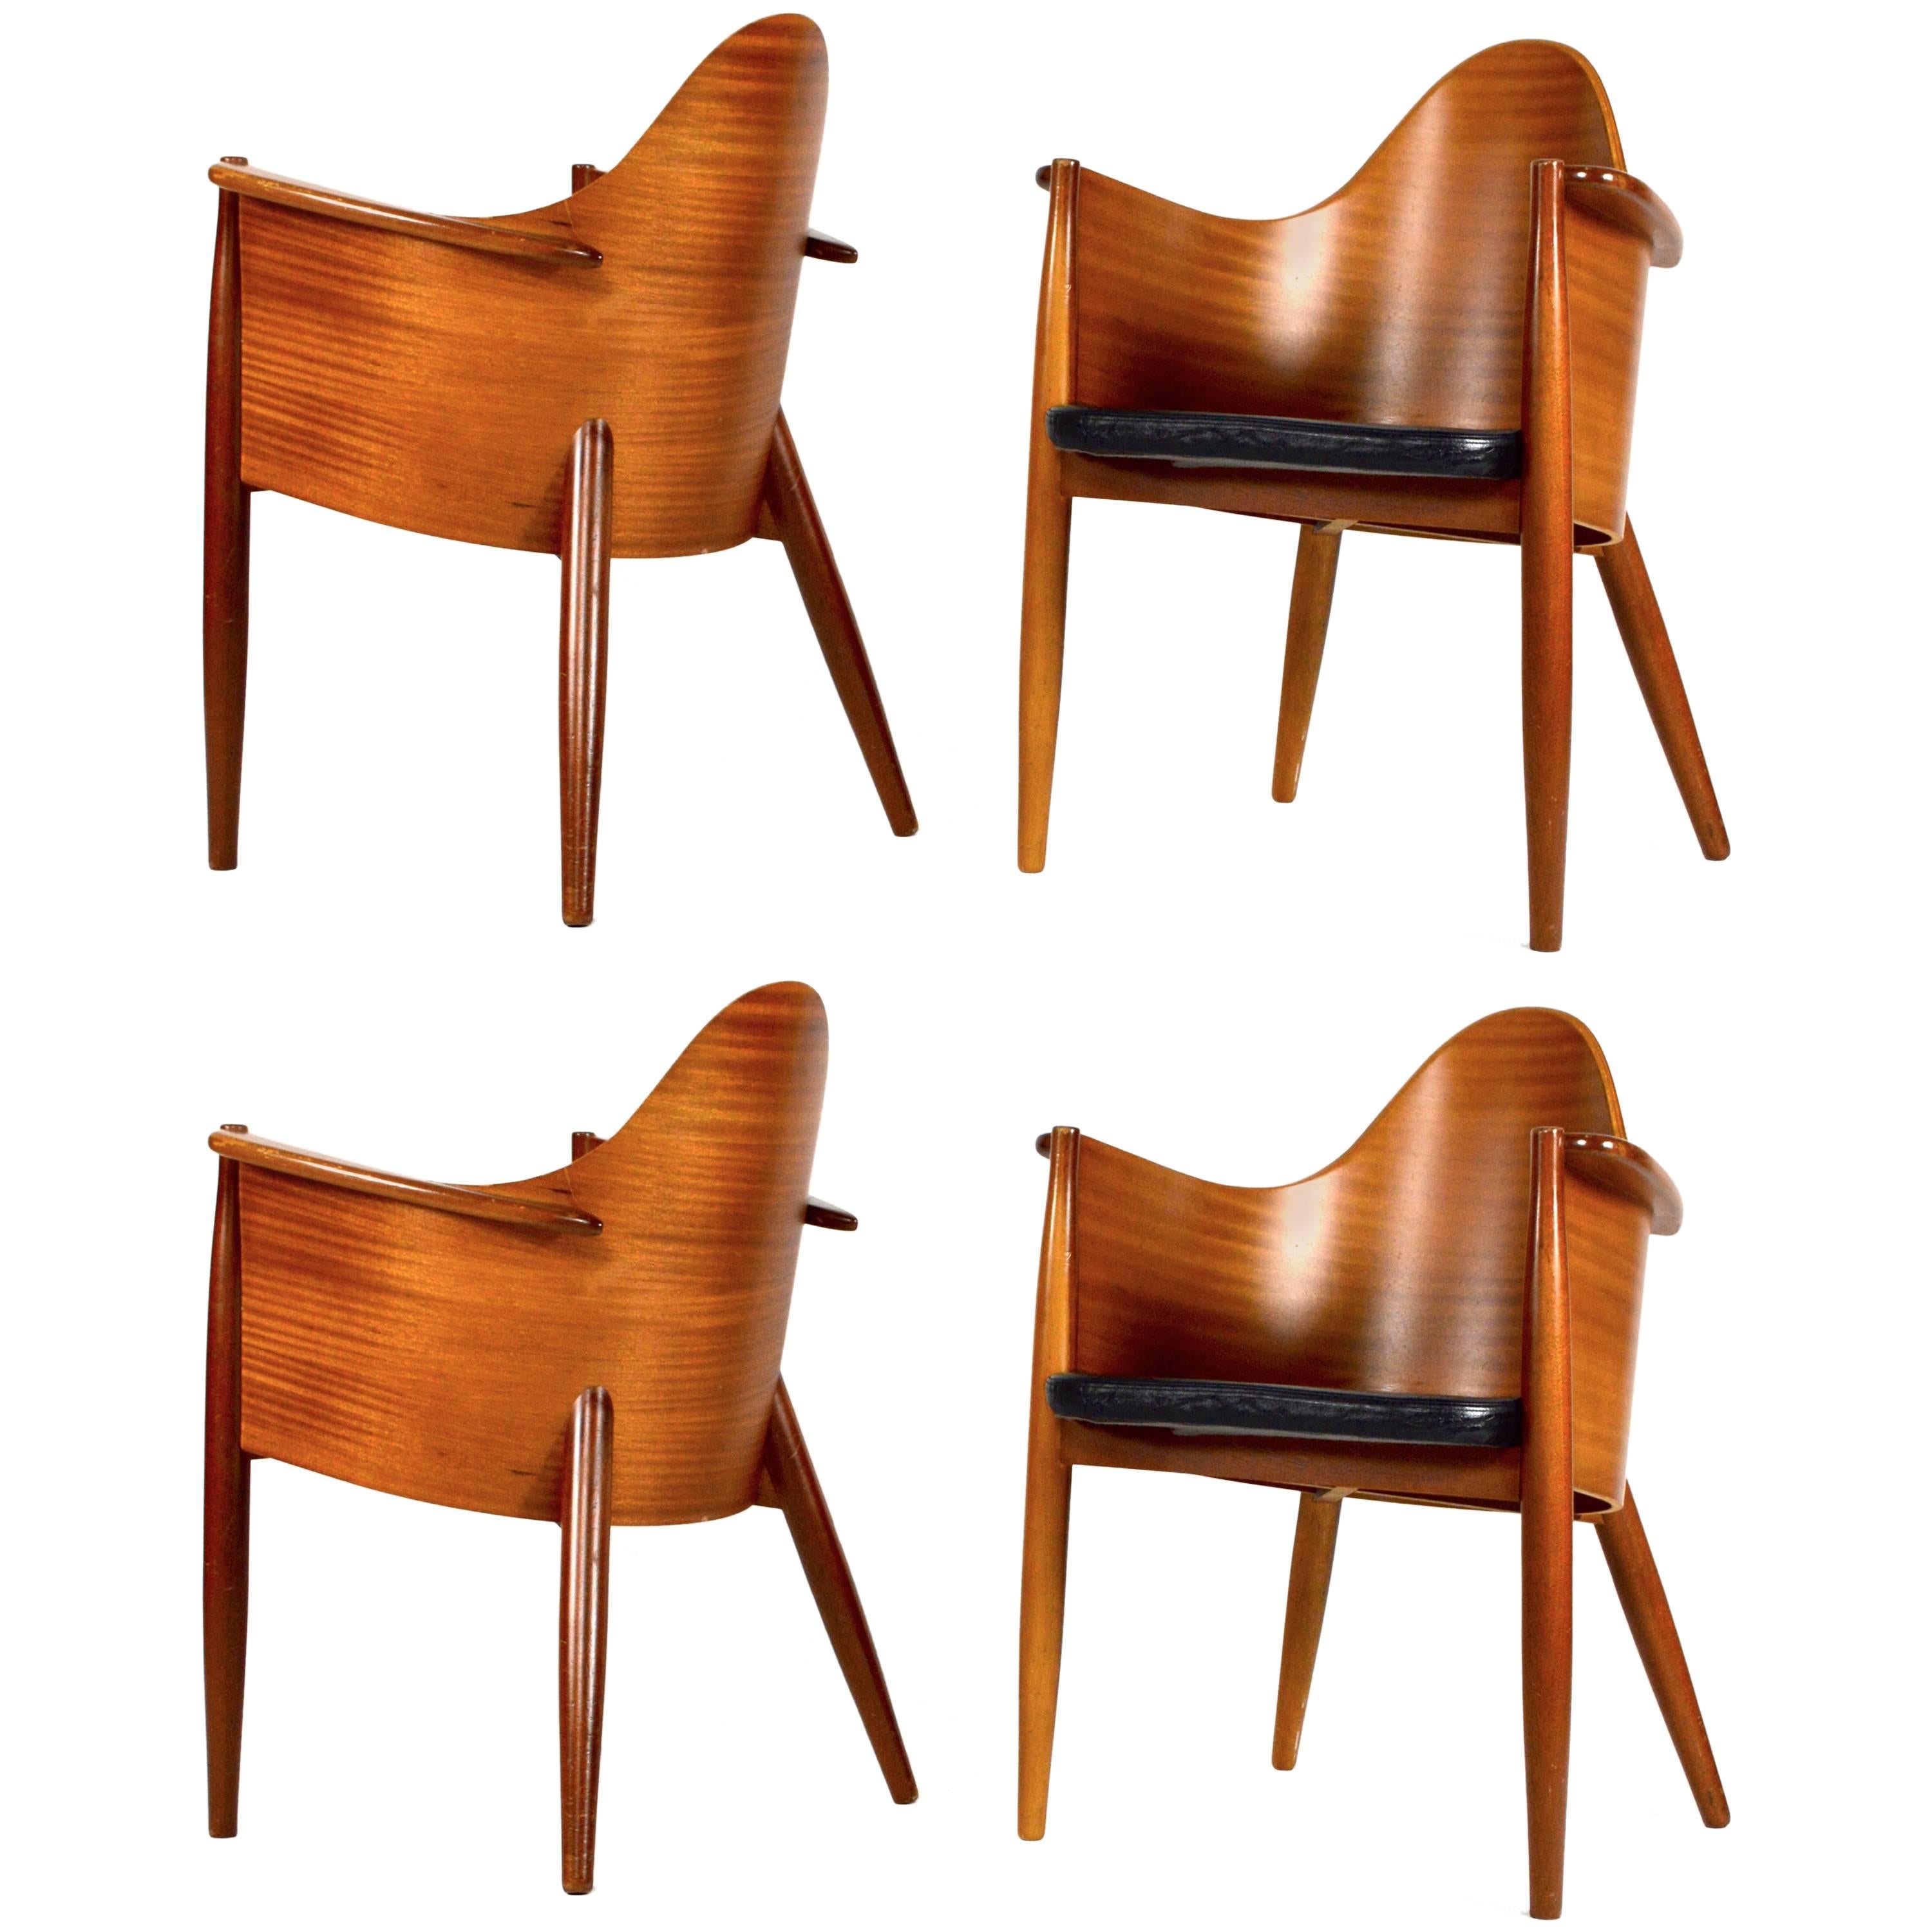 Very rare set of 4 Scandinavian Teak Plywood / Leather Side Chairs - Mid Century